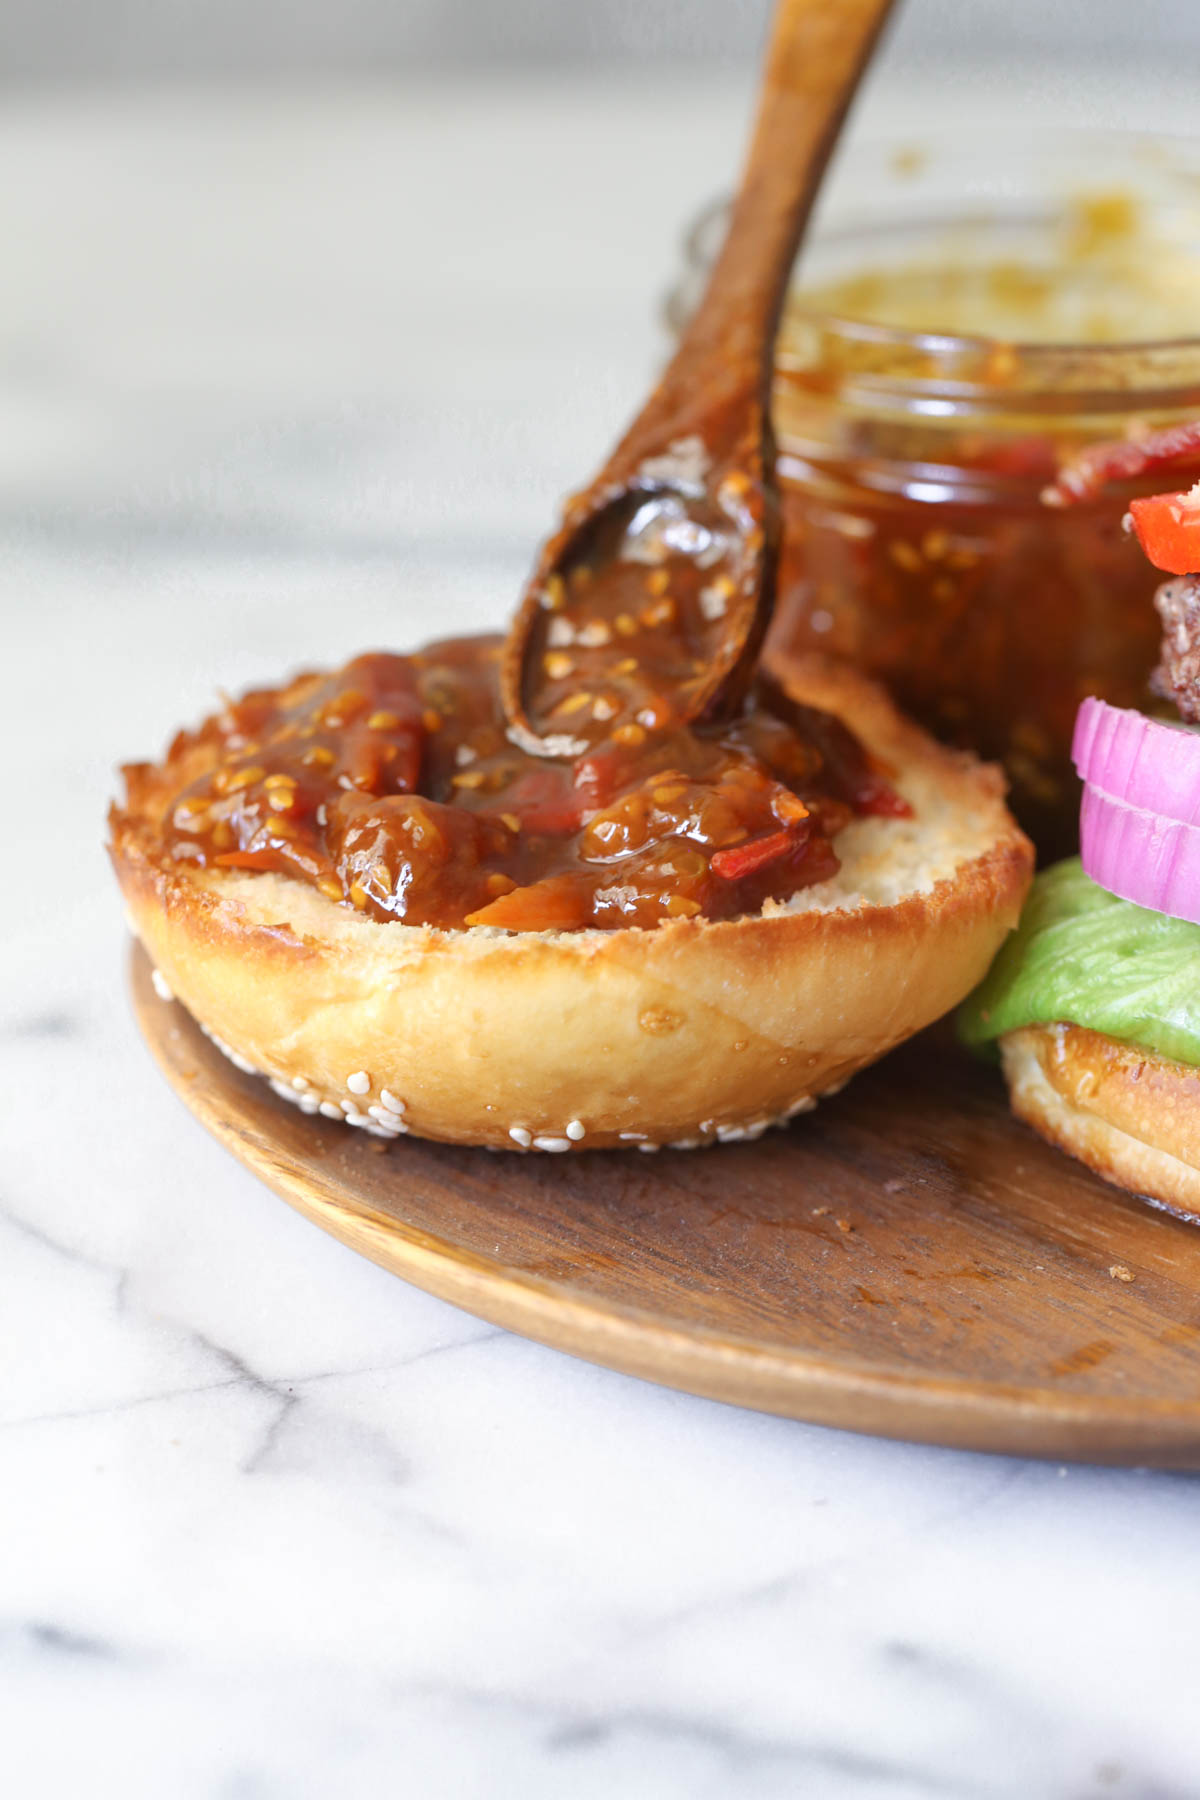 Tomato Jam being spooned onto the top of a hamburger bun with a small wooden spoon, with a small glass jar of Tomato Jam next to the bun.  